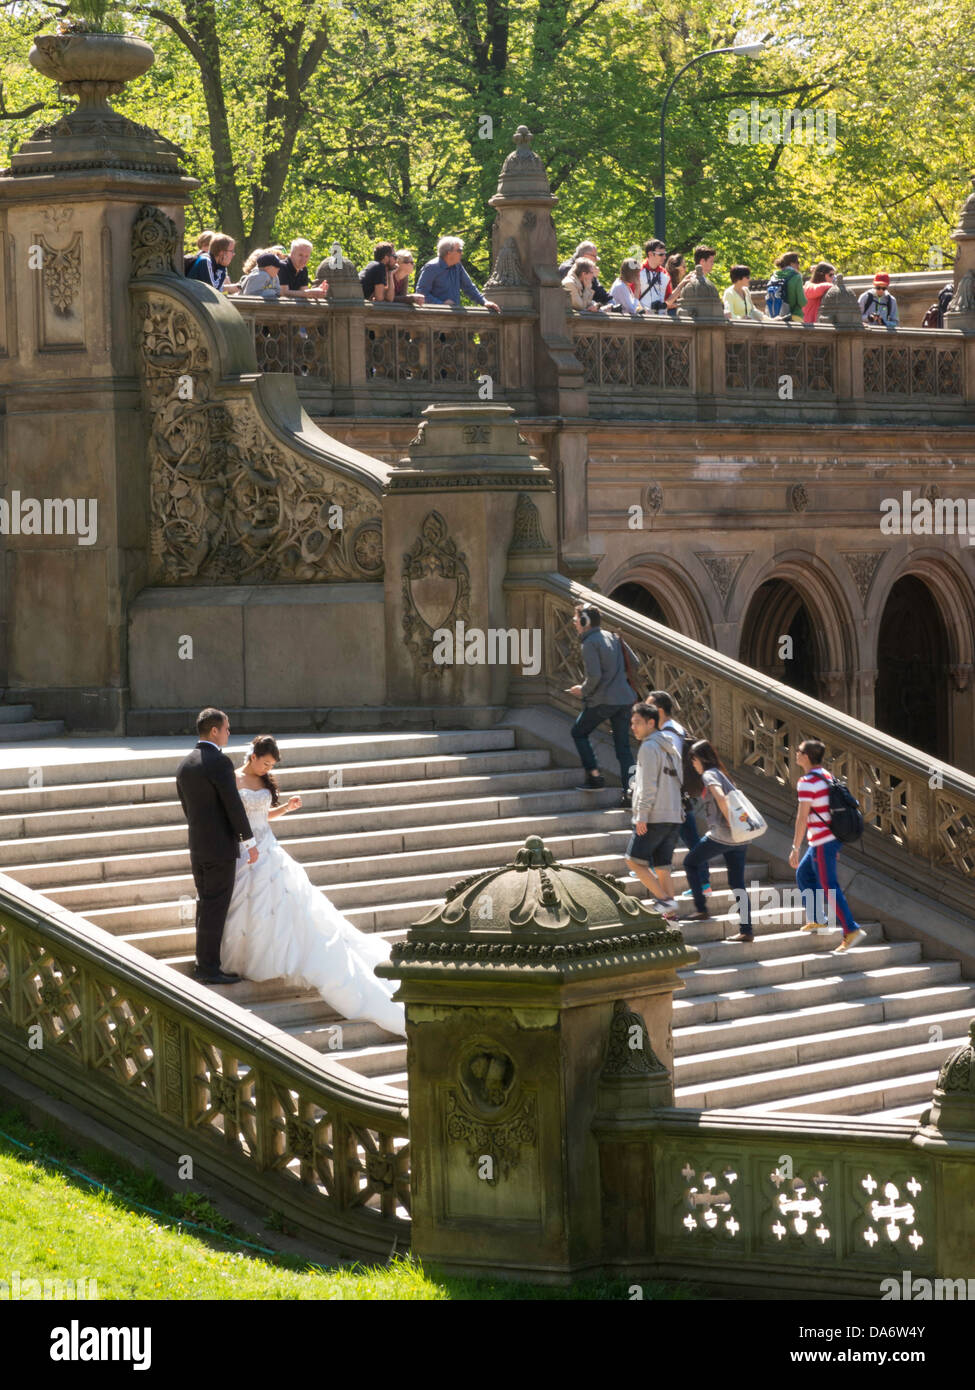 Bethesda Terrace - Wedding Packages NYC